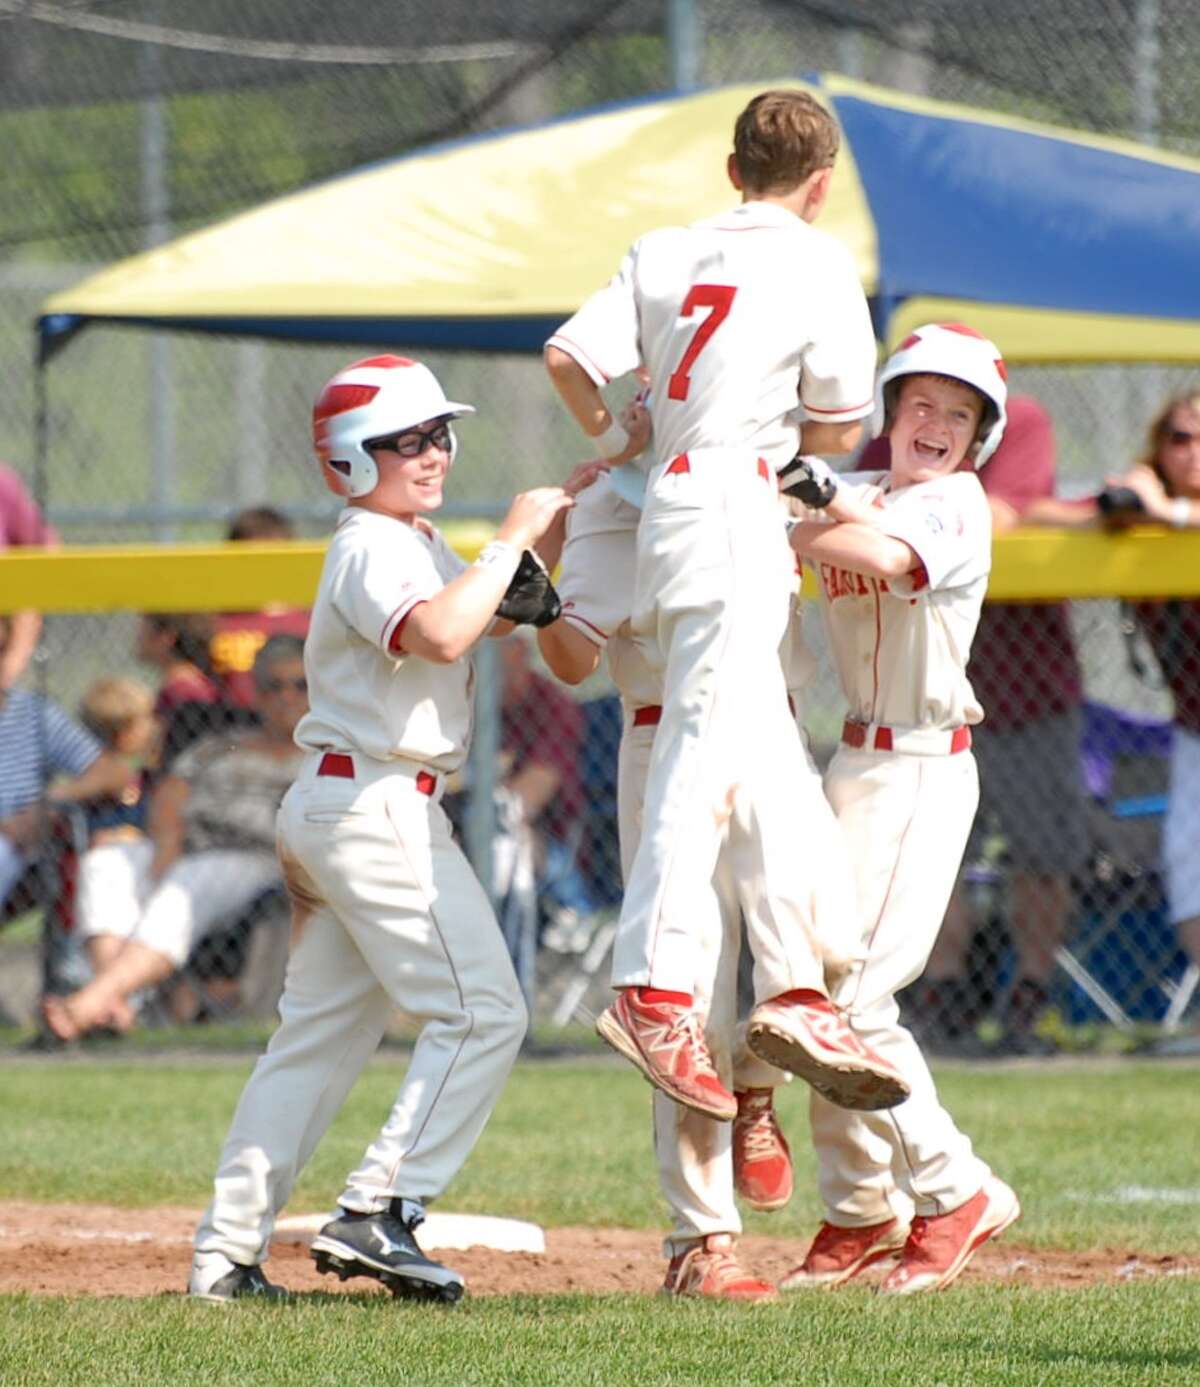 Fairfield American Little League celebrates winning the state title over South Windsor 12-2 on Sunday afternoon in Harwinton. Photo by Mary Albl